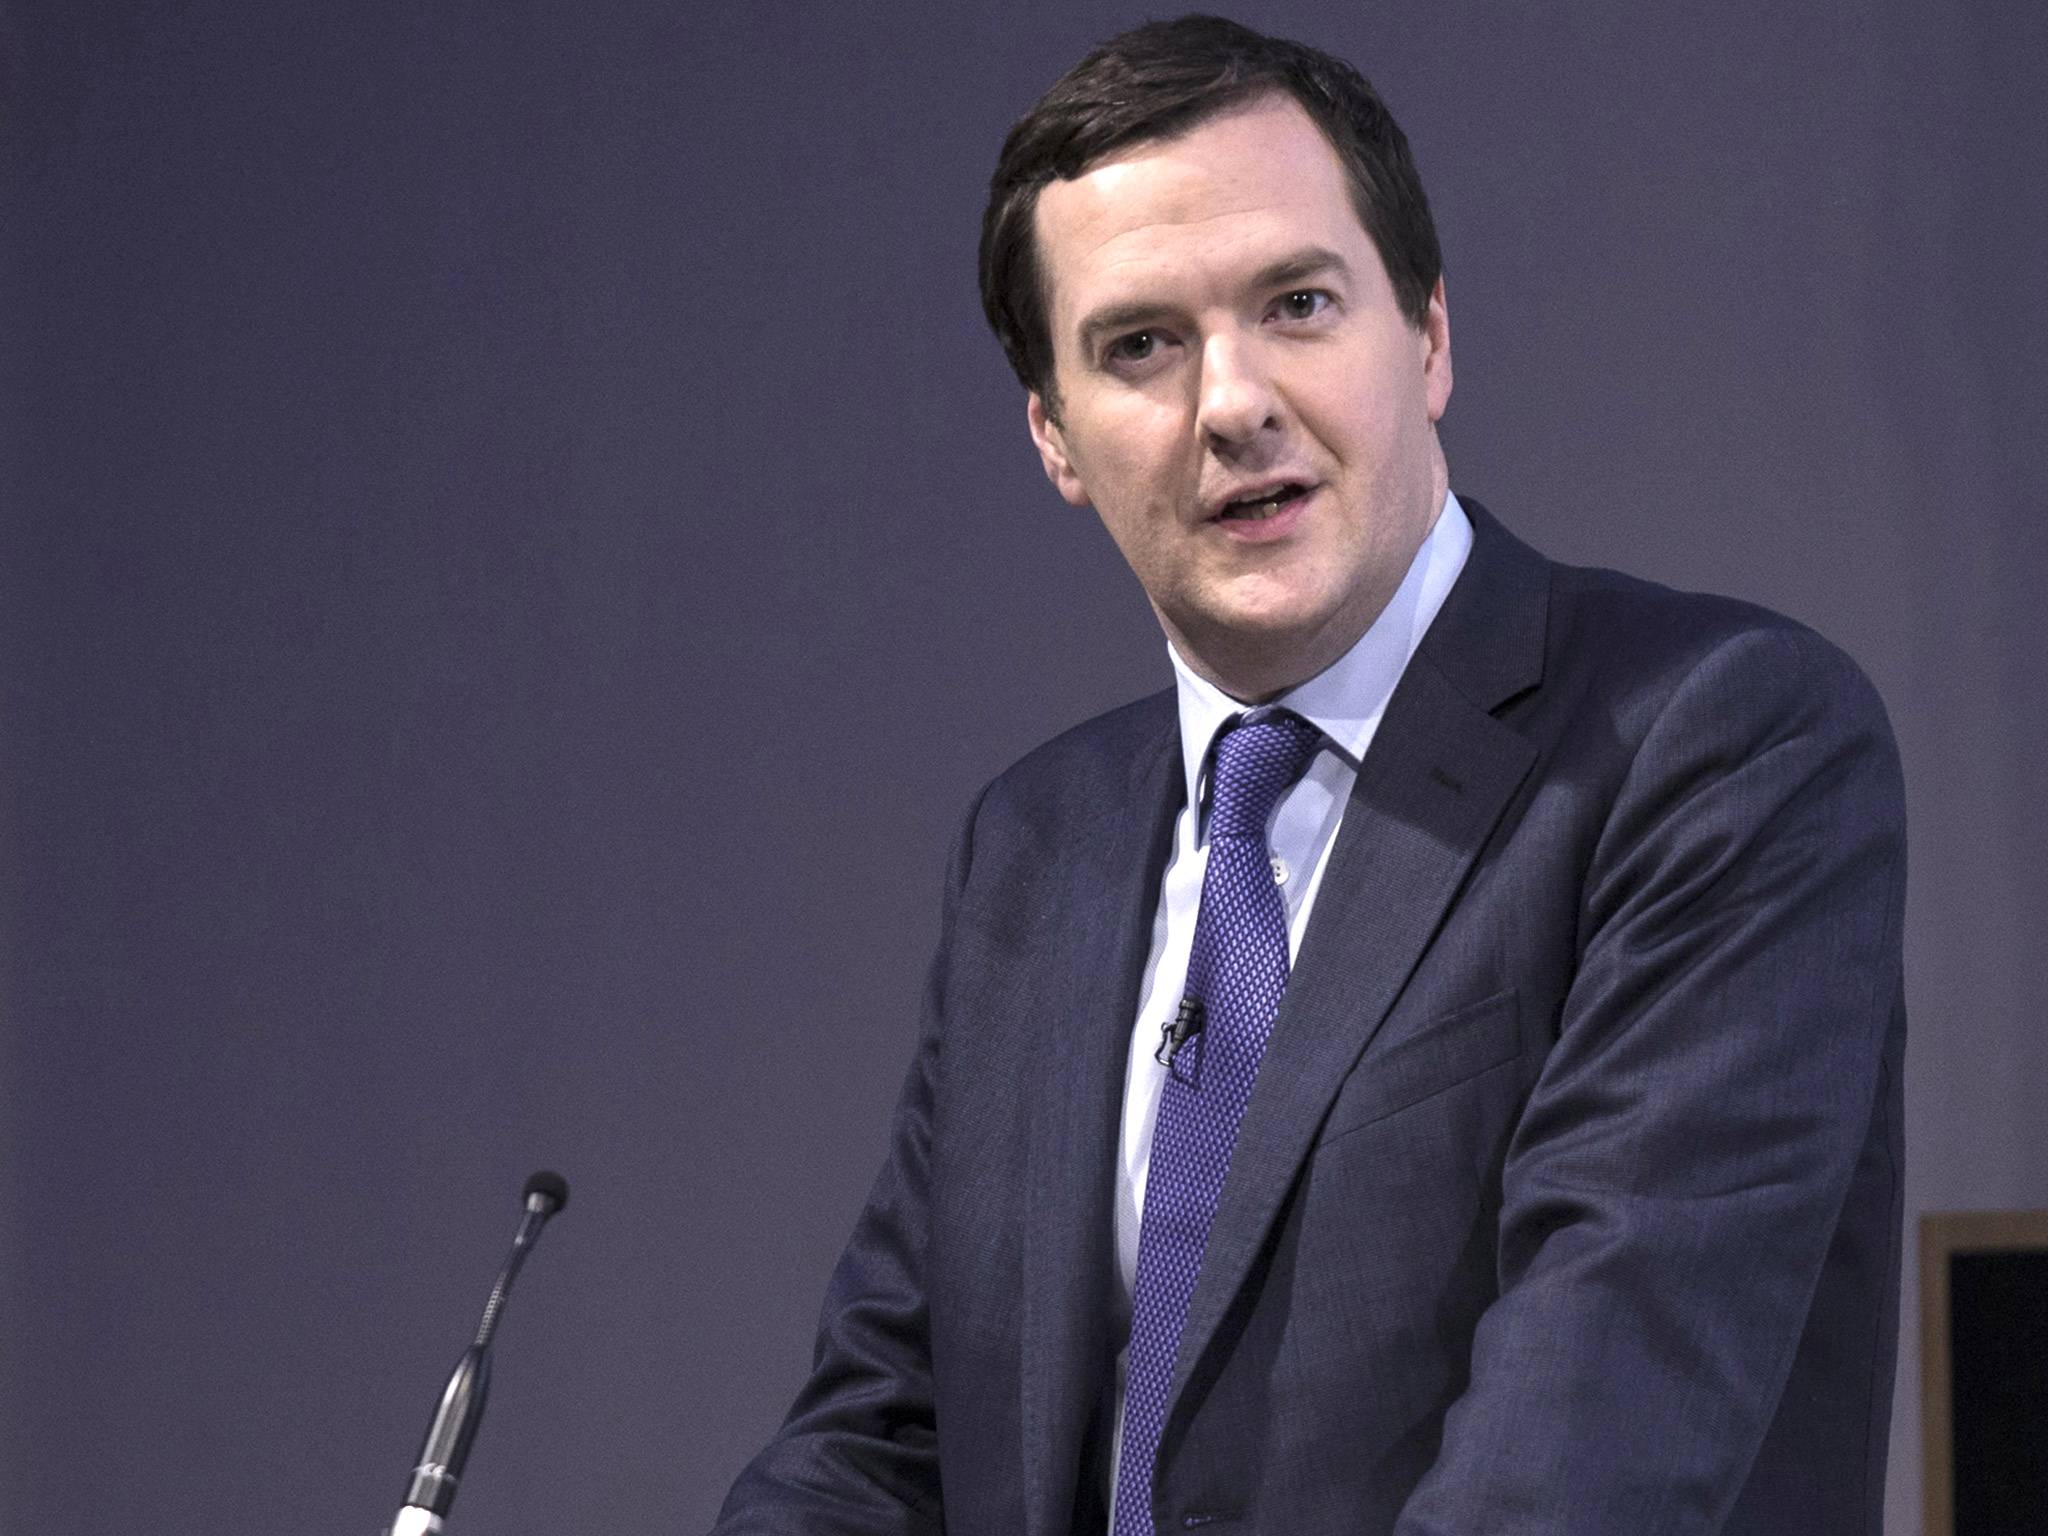 George Osborne says that an independent Scotland could not join a formal currency union